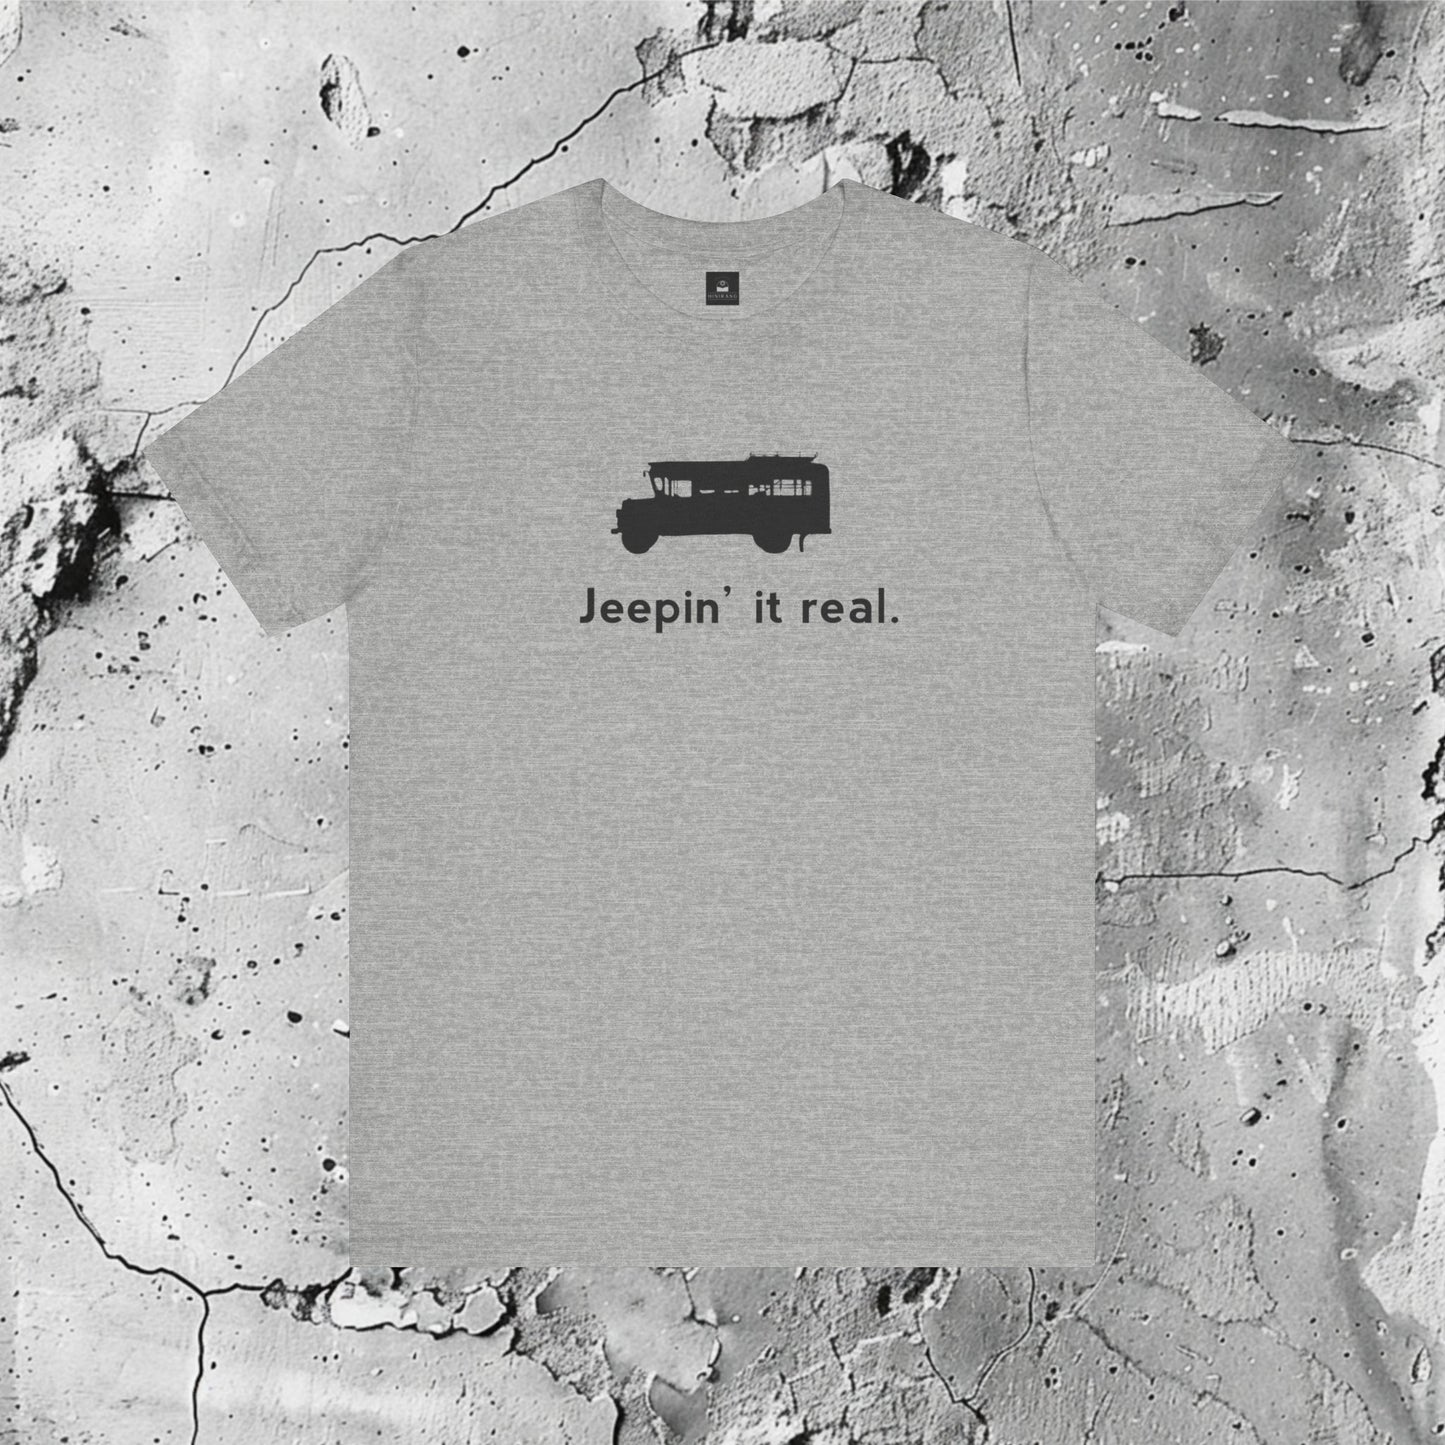 Jeepin' It Real Graphic T-Shirt